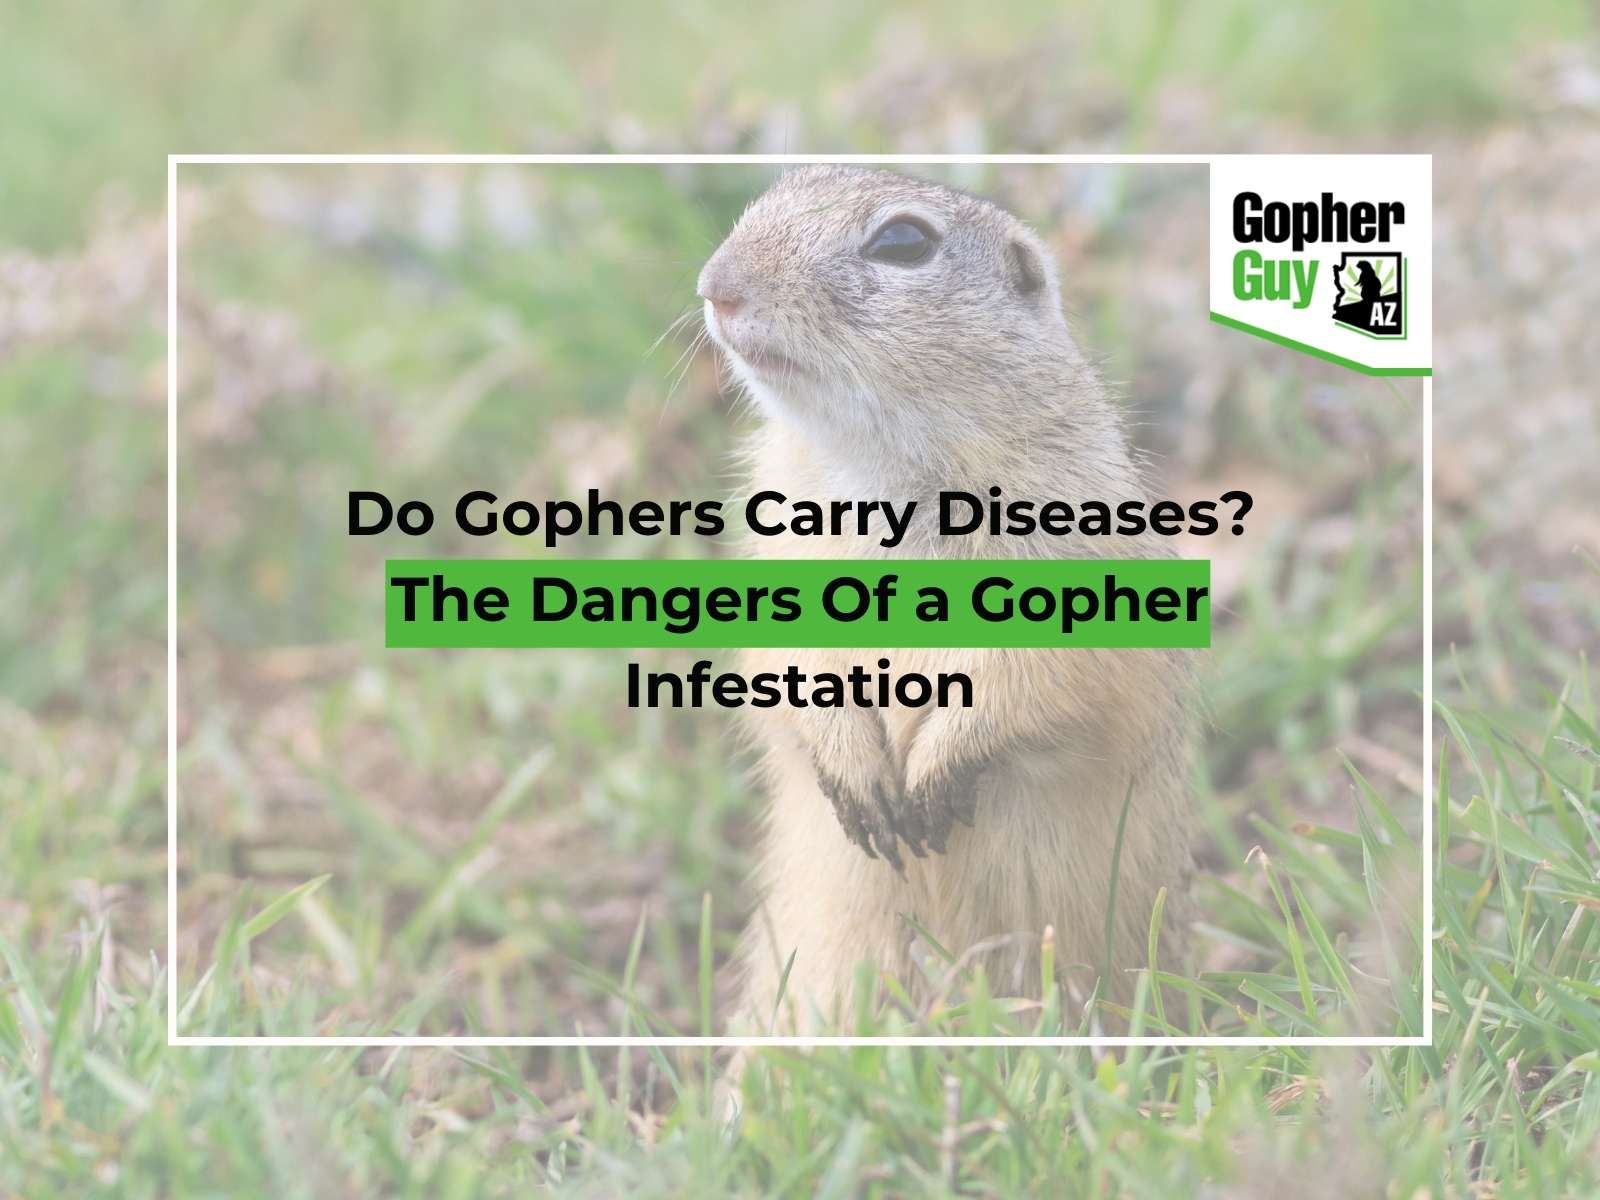 Do Gophers Carry Diseases The Dangers Of a Gopher Infestation